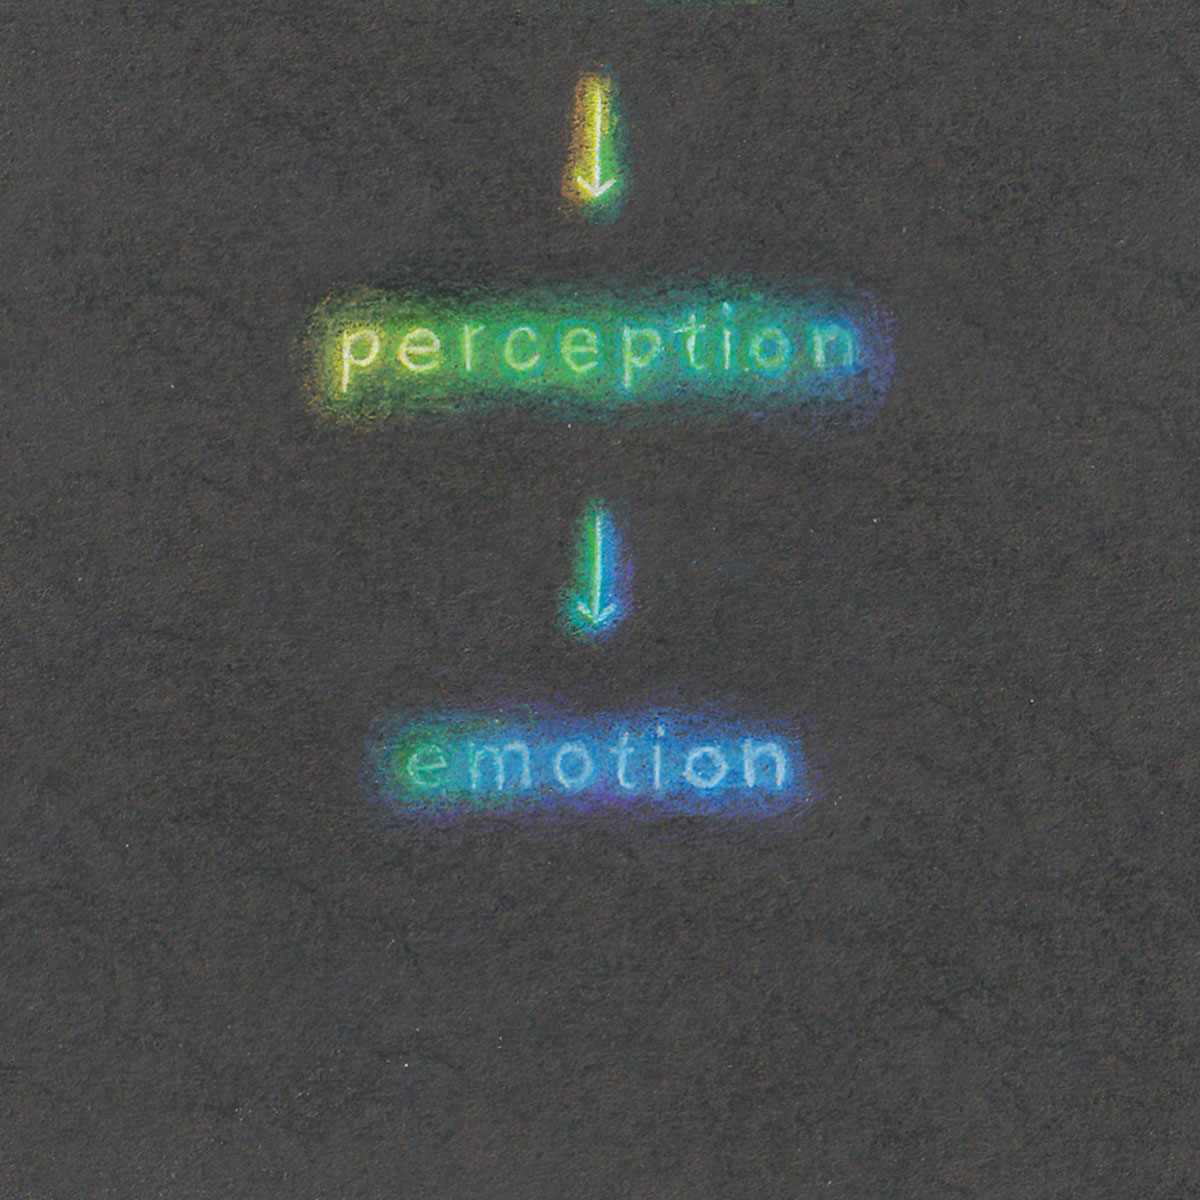 Rainbow text of yellow, green, and blue against a black background